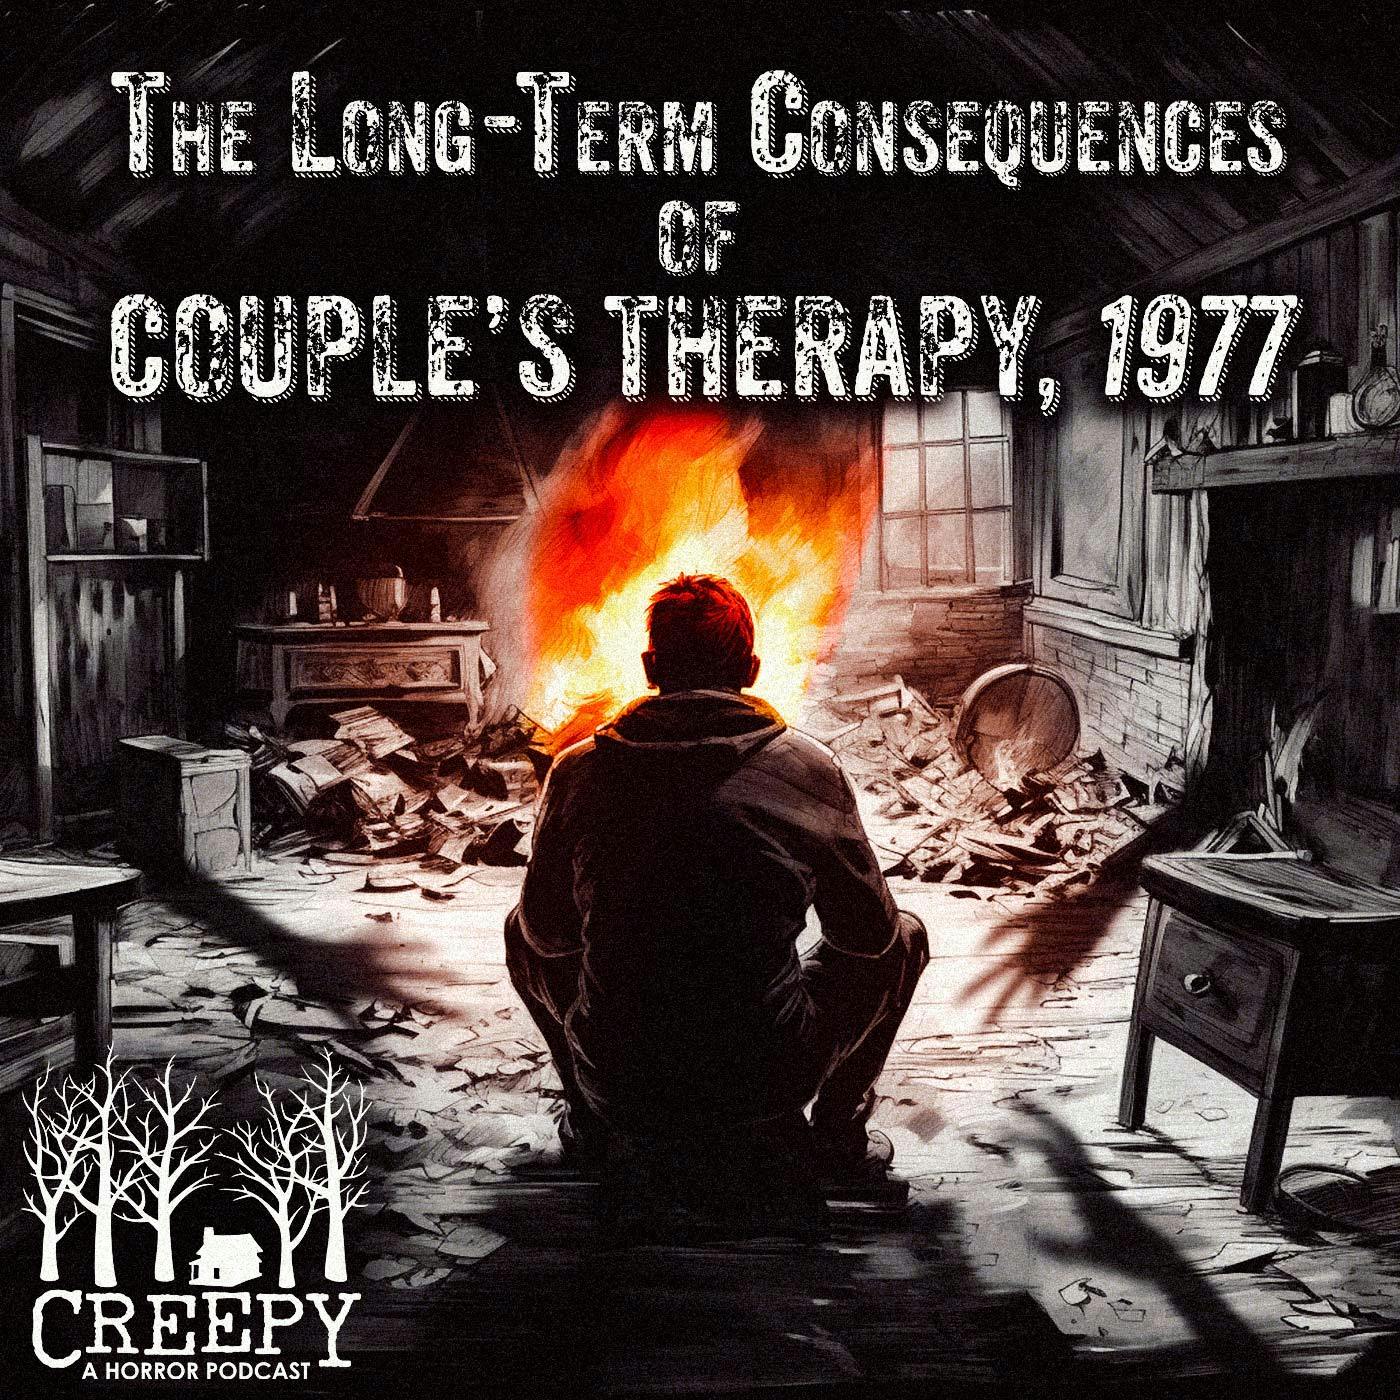 The Long-Term Consequences of Couple’s Therapy, 1977